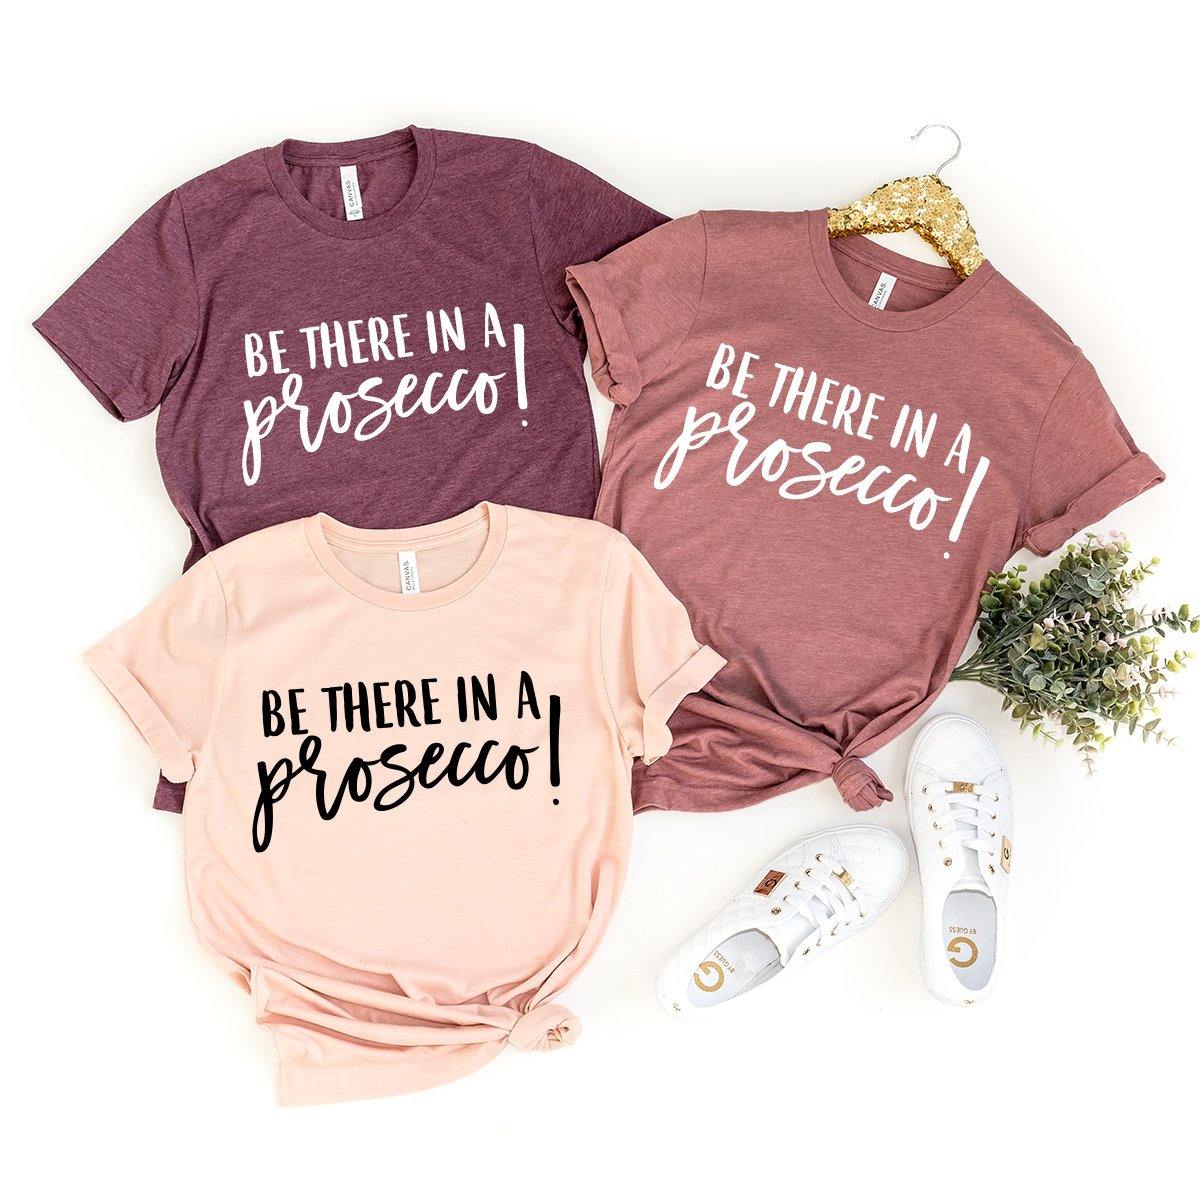 Wine Shirt, Wine Lover Shirt, Wine Tee, Funny Wine Shirt, Drinking Shirt, Drink Wine Shirt, Wine T-Shirt, Be There In A Prosecco Shirt - Fastdeliverytees.com